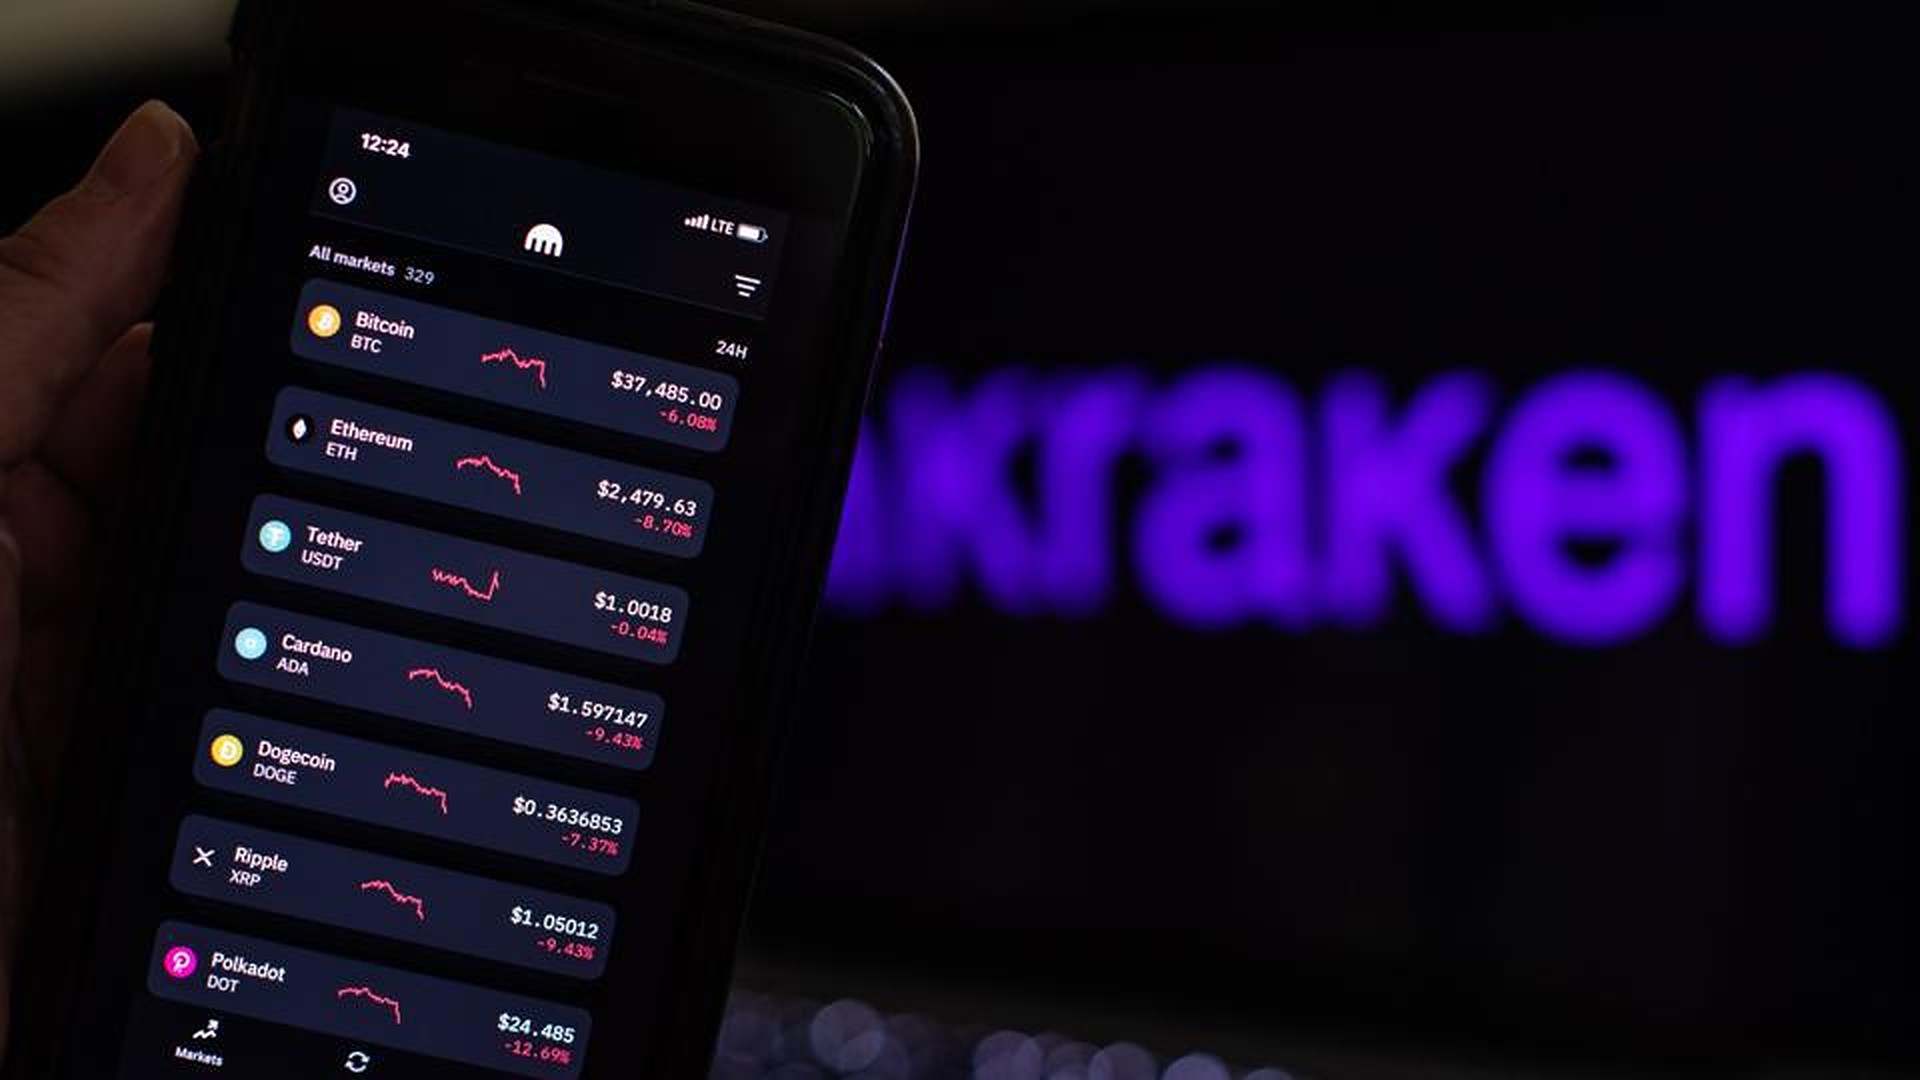 Kraken Pro Expands Margin Trading with Shiba Inu Cryptocurrency, Emphasizing Community-Driven Growth